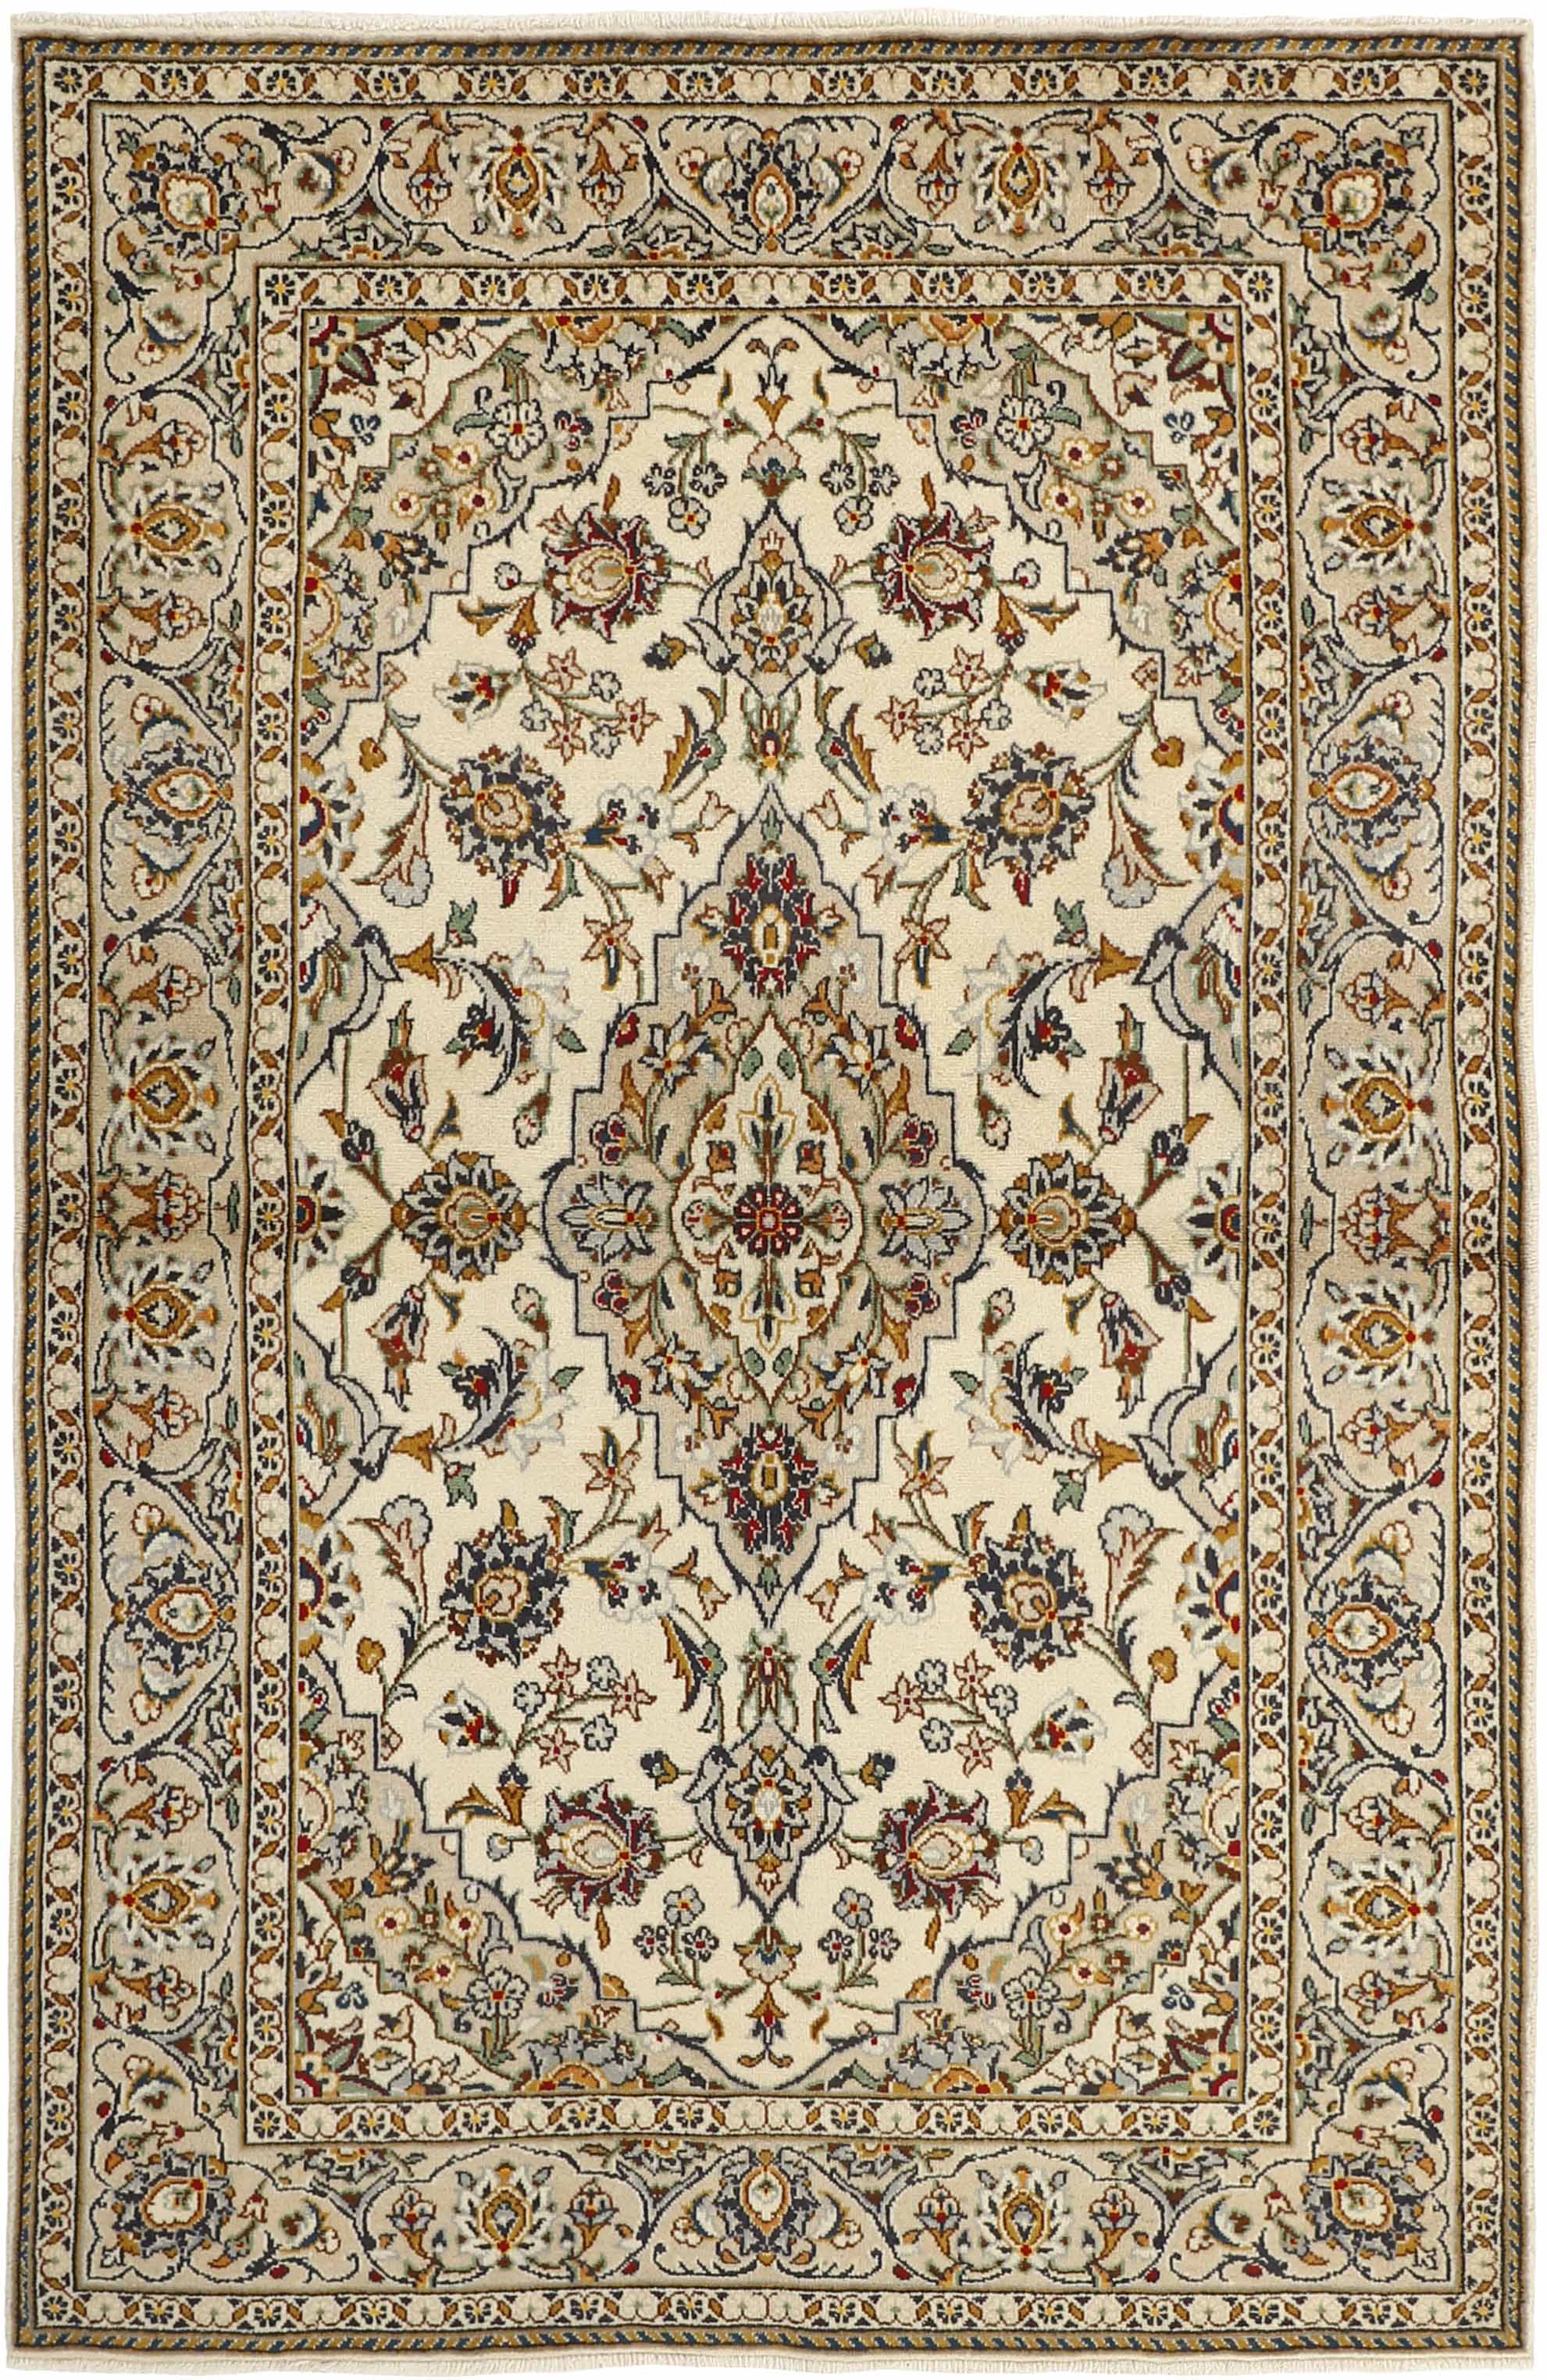 Authentic persian rug with traditional floral design in red and blue